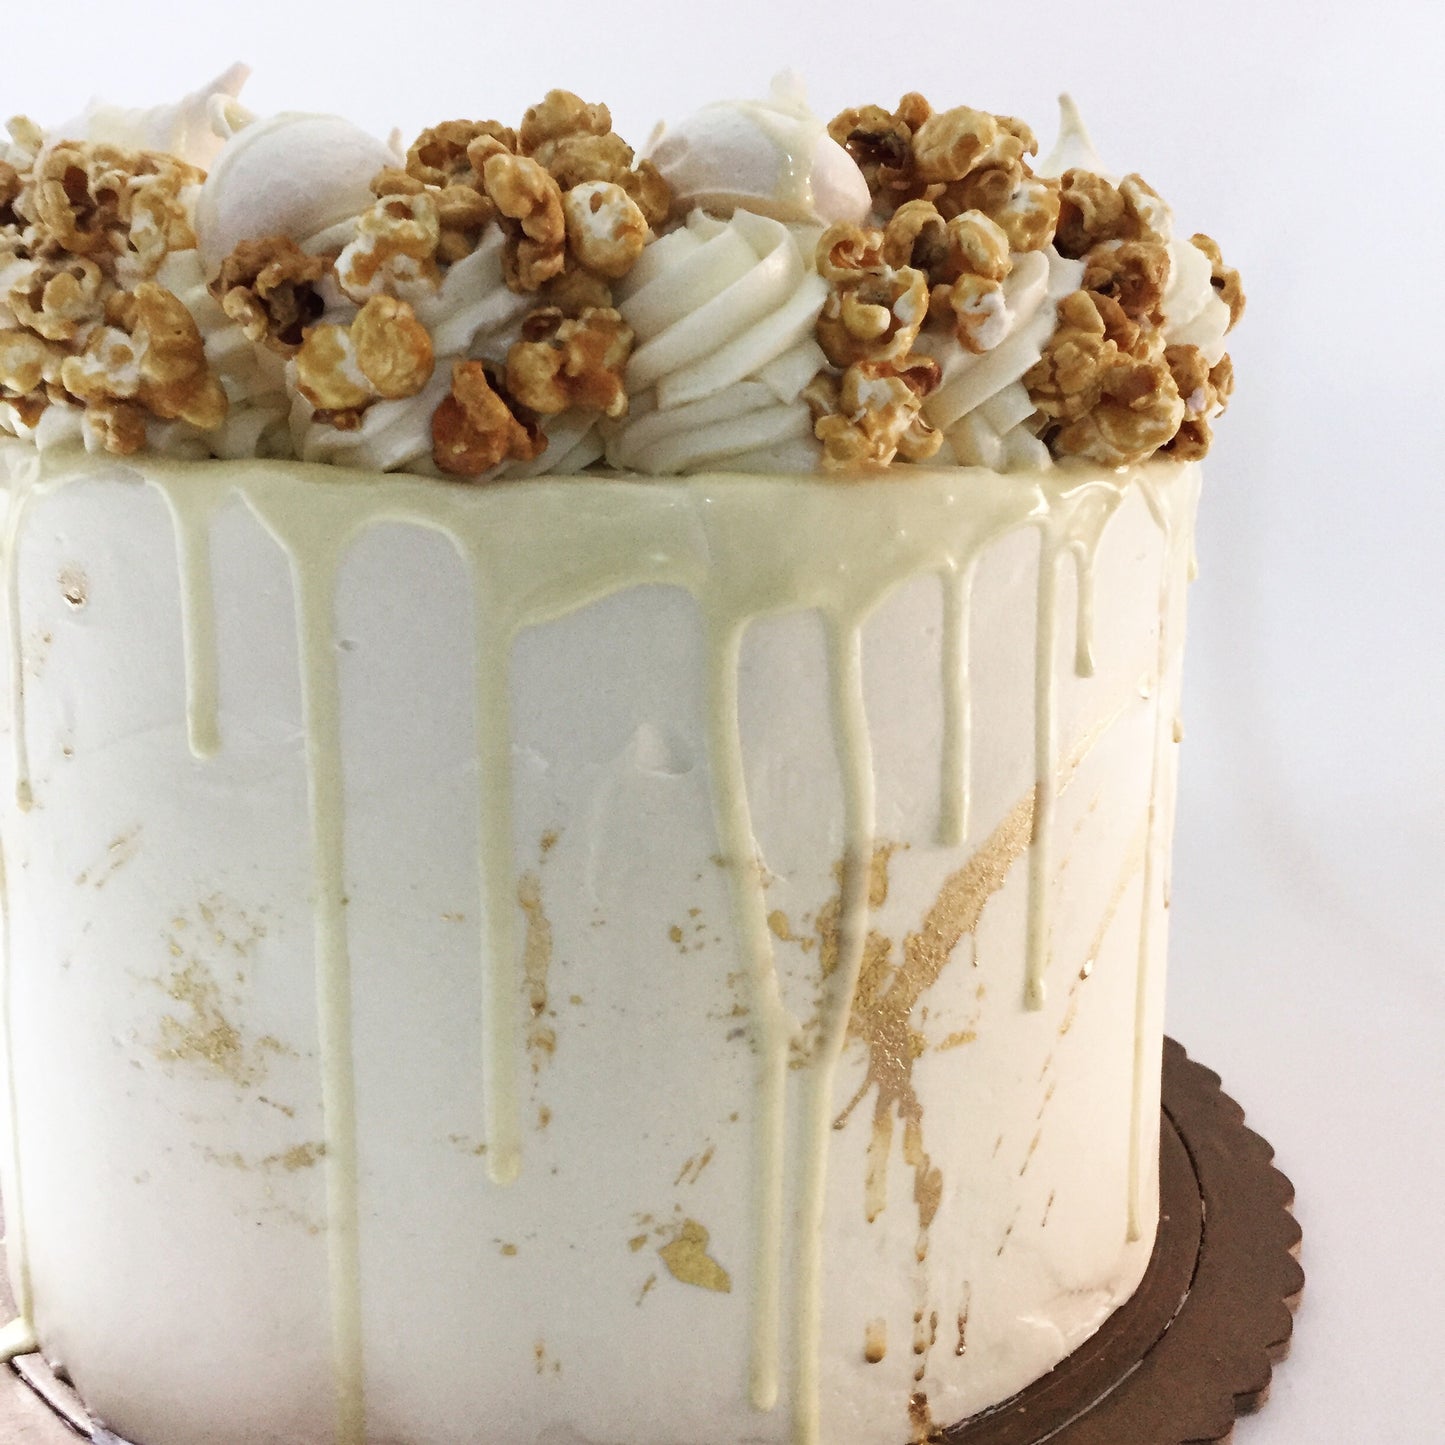 “How do you want it?”: Build Your Own Layer Cake